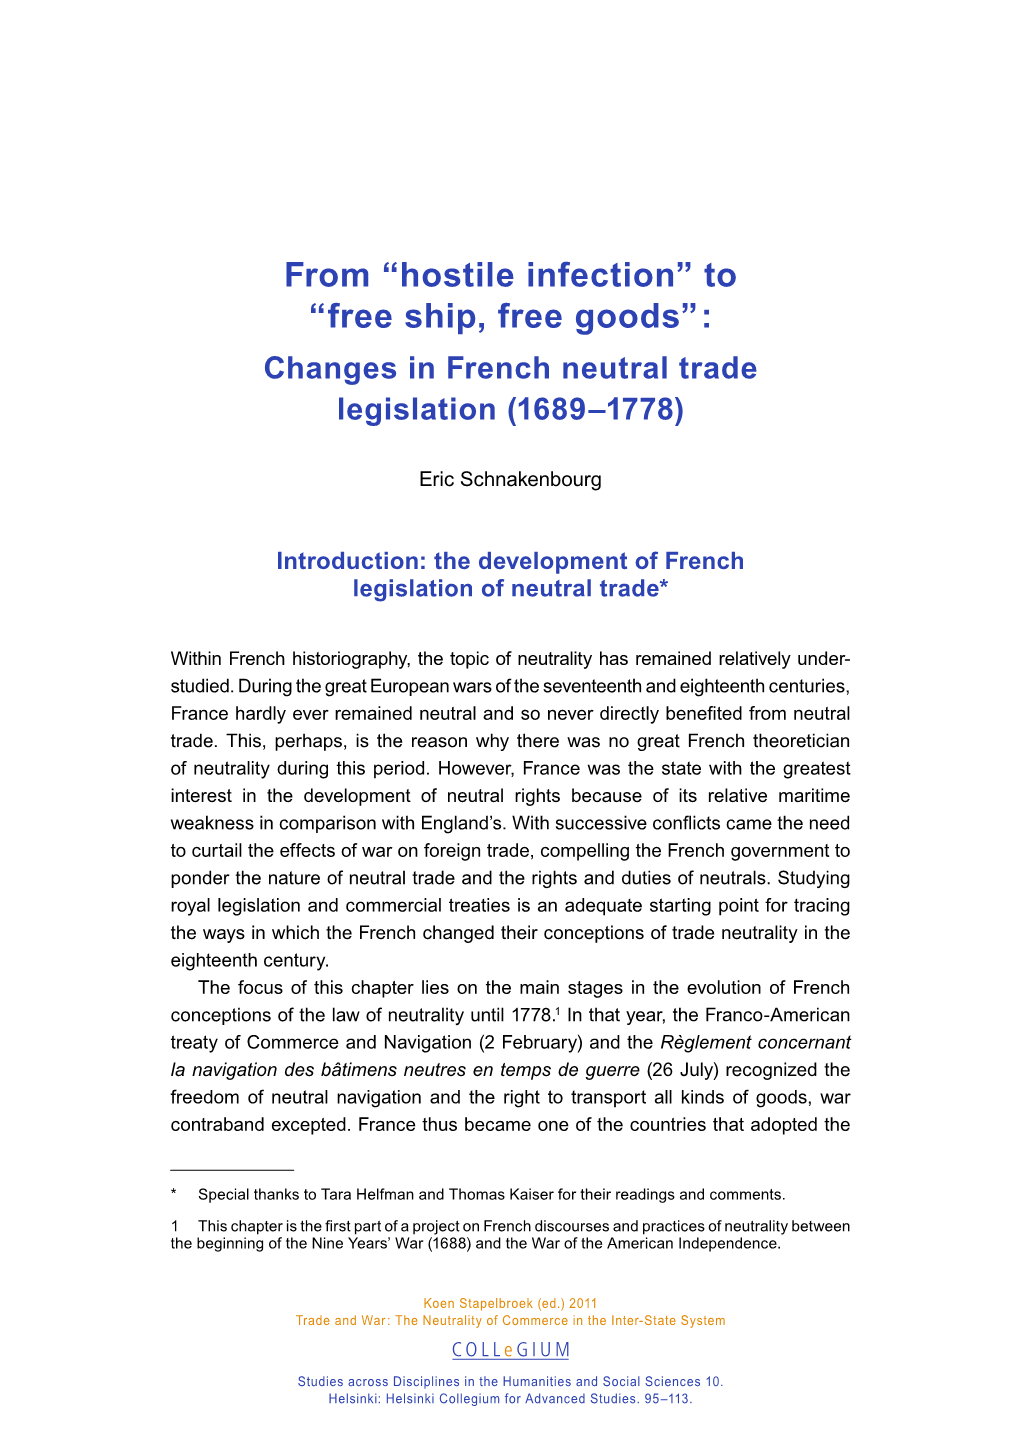 Free Ship, Free Goods” : Changes in French Neutral Trade Legislation (1689–1778)